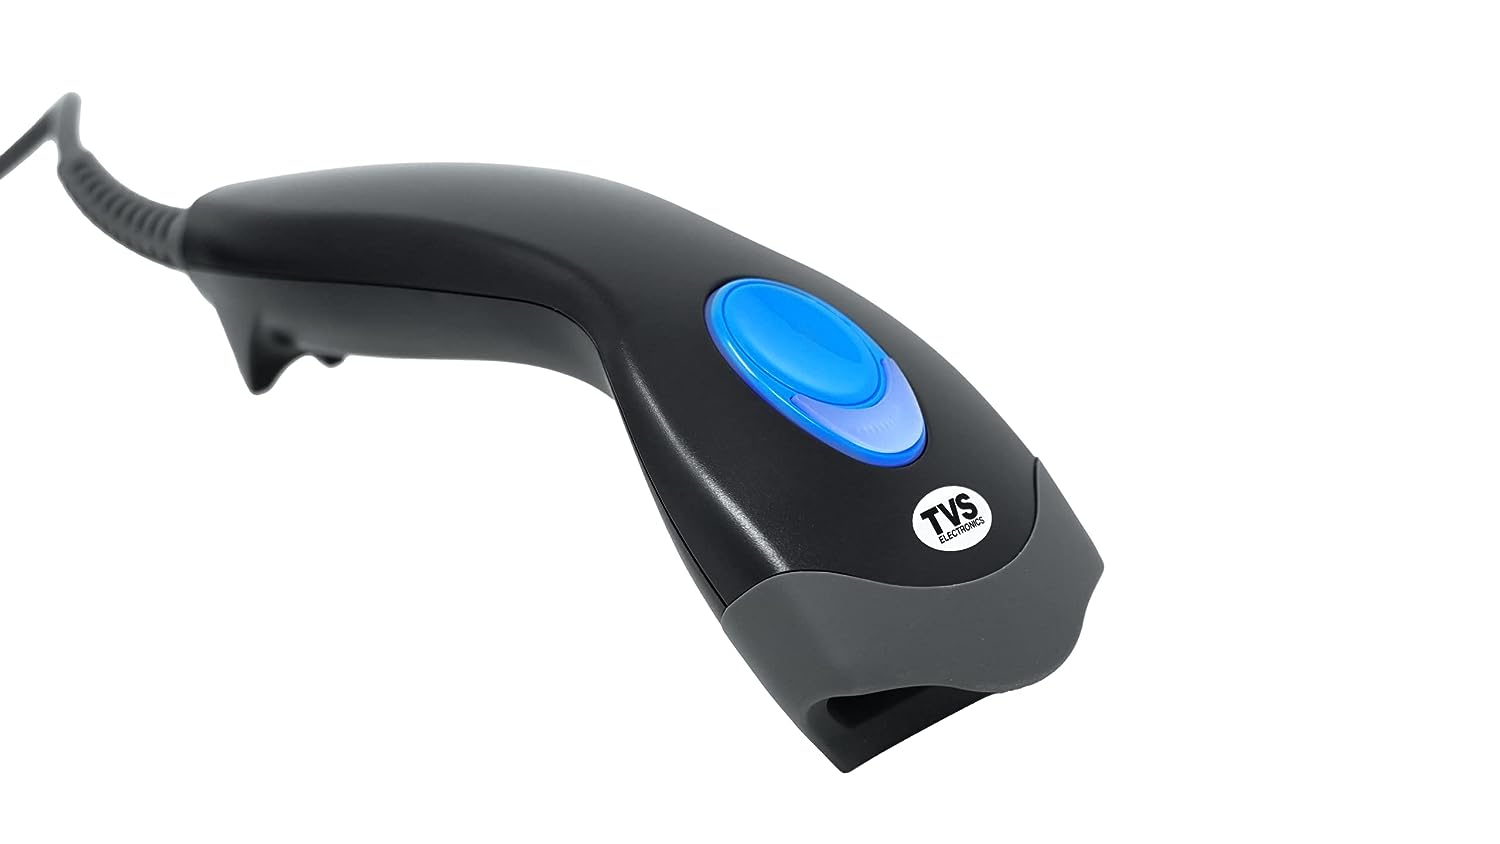 tvs-electronics-bs-c101-star-barcode-scanner-aim-and-shoot-trigger-1d-linear-imager-to-scanner-express-speed-of-330-scans-per-second-plug-and-play